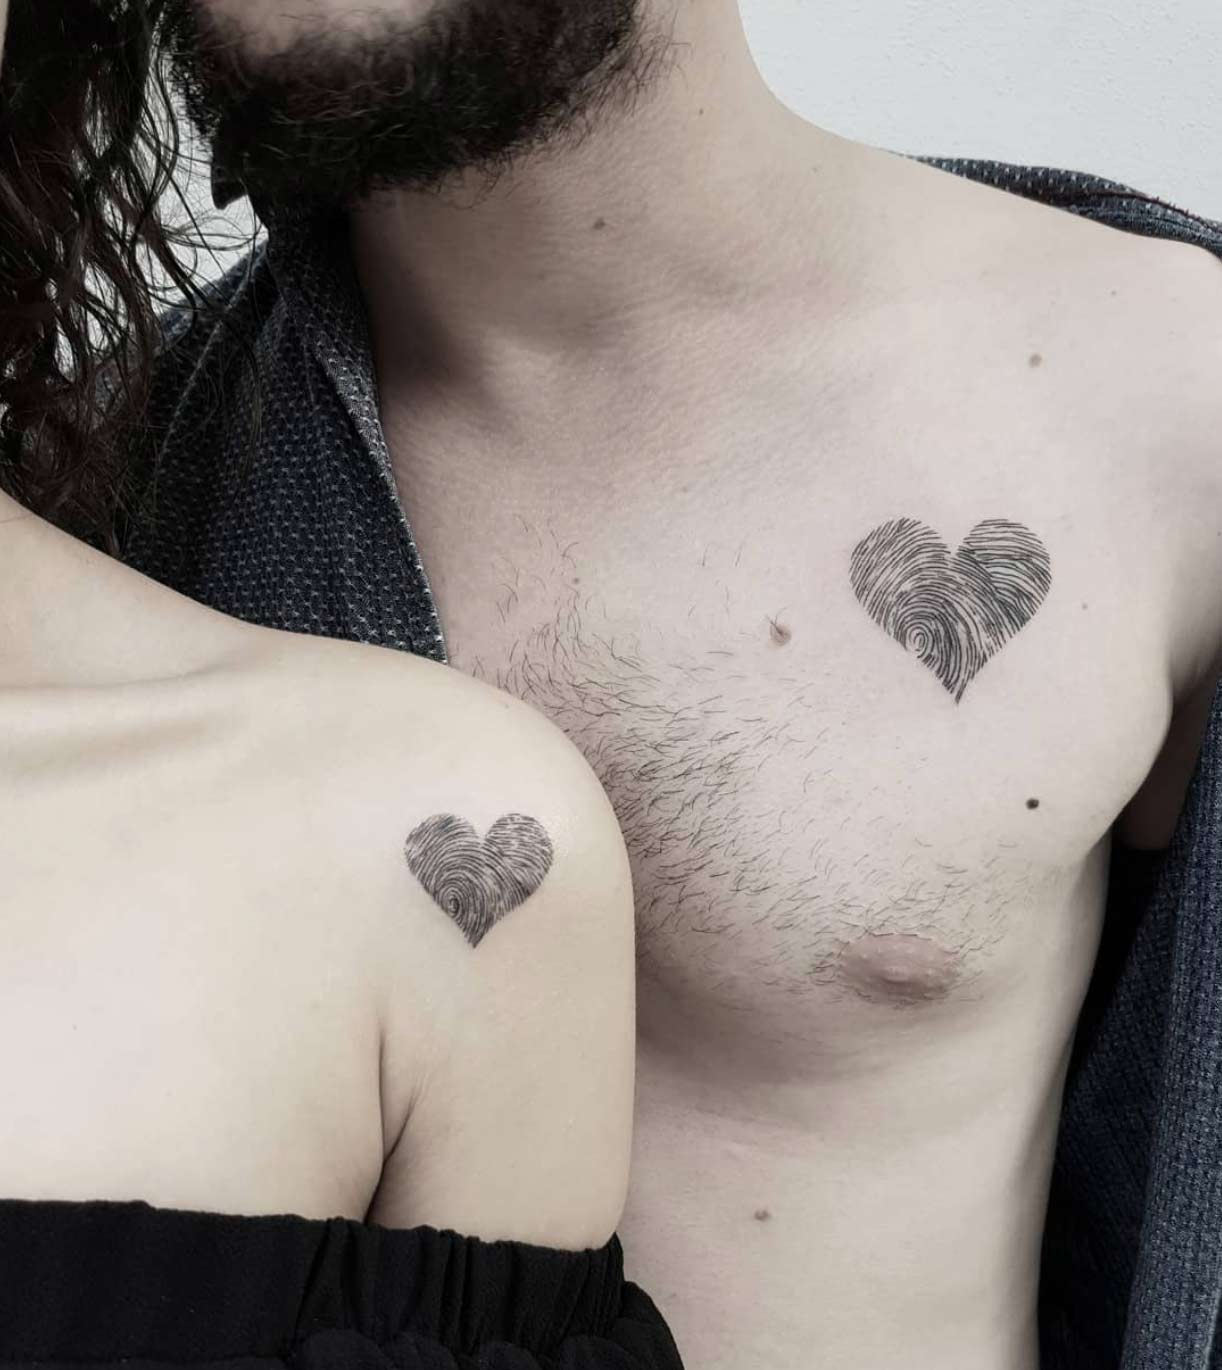 60 Couple Tattoos We Promise Youll Love Straight Blasted within dimensions 1222 X 1370